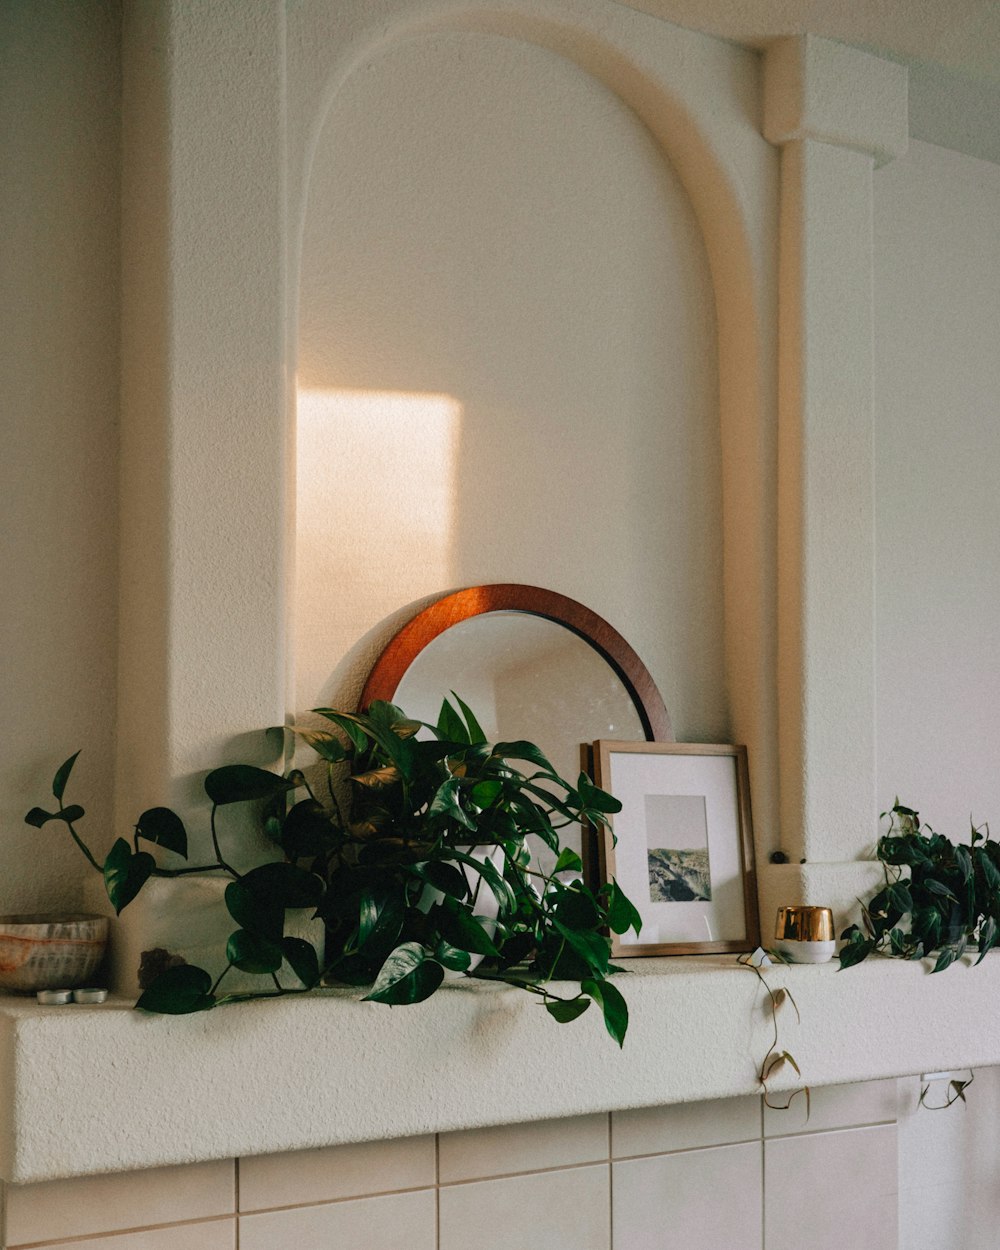 a picture of a mirror and some plants on a mantle